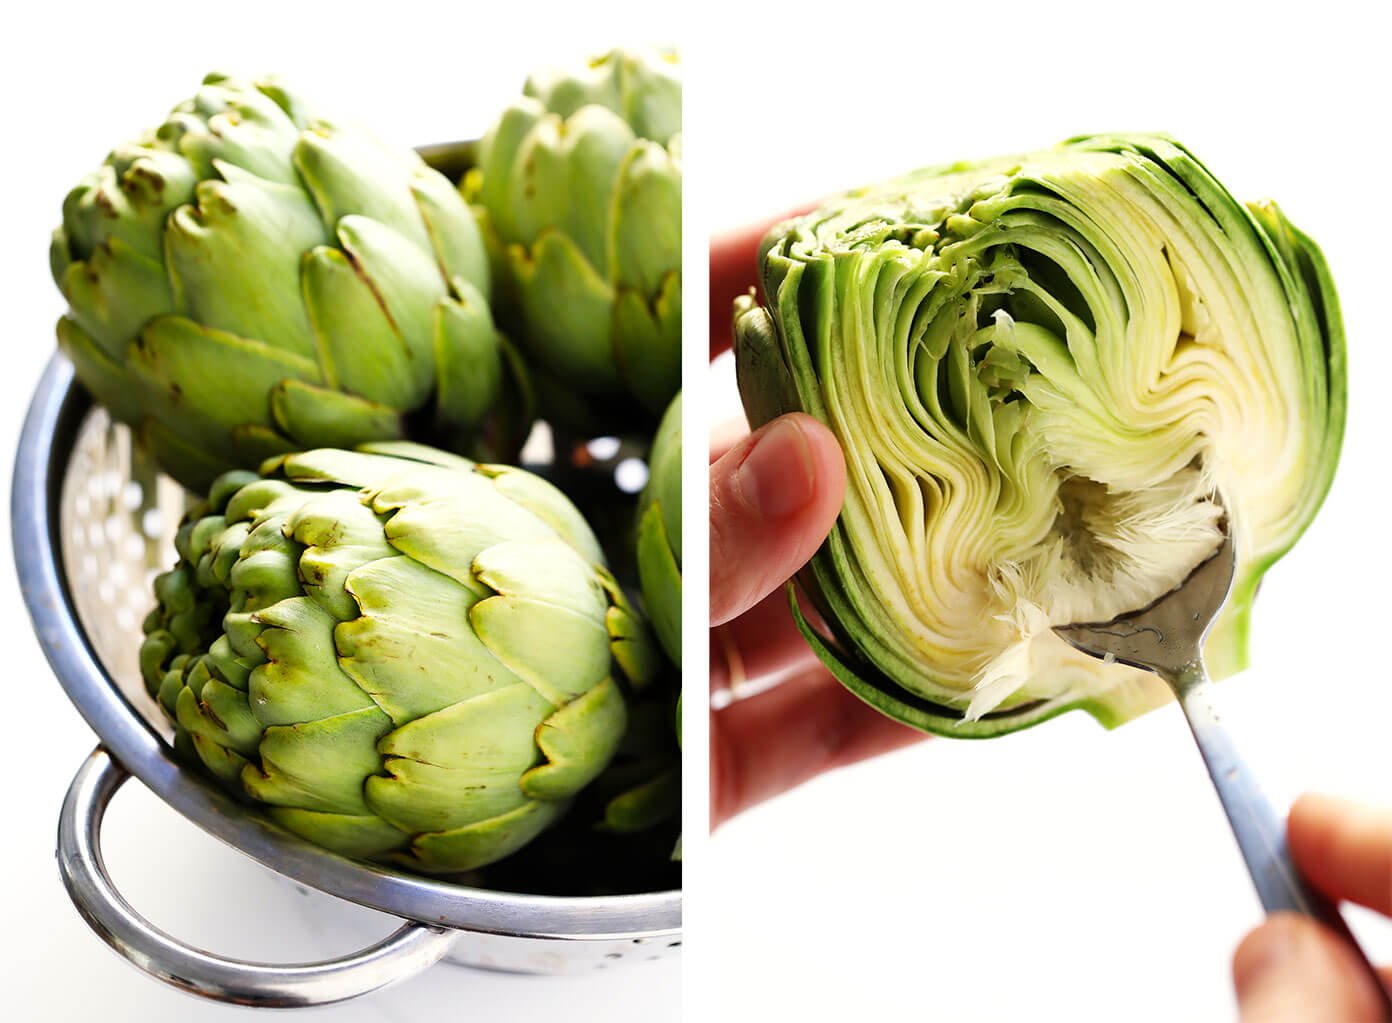 How To Select and Cut Artichokes